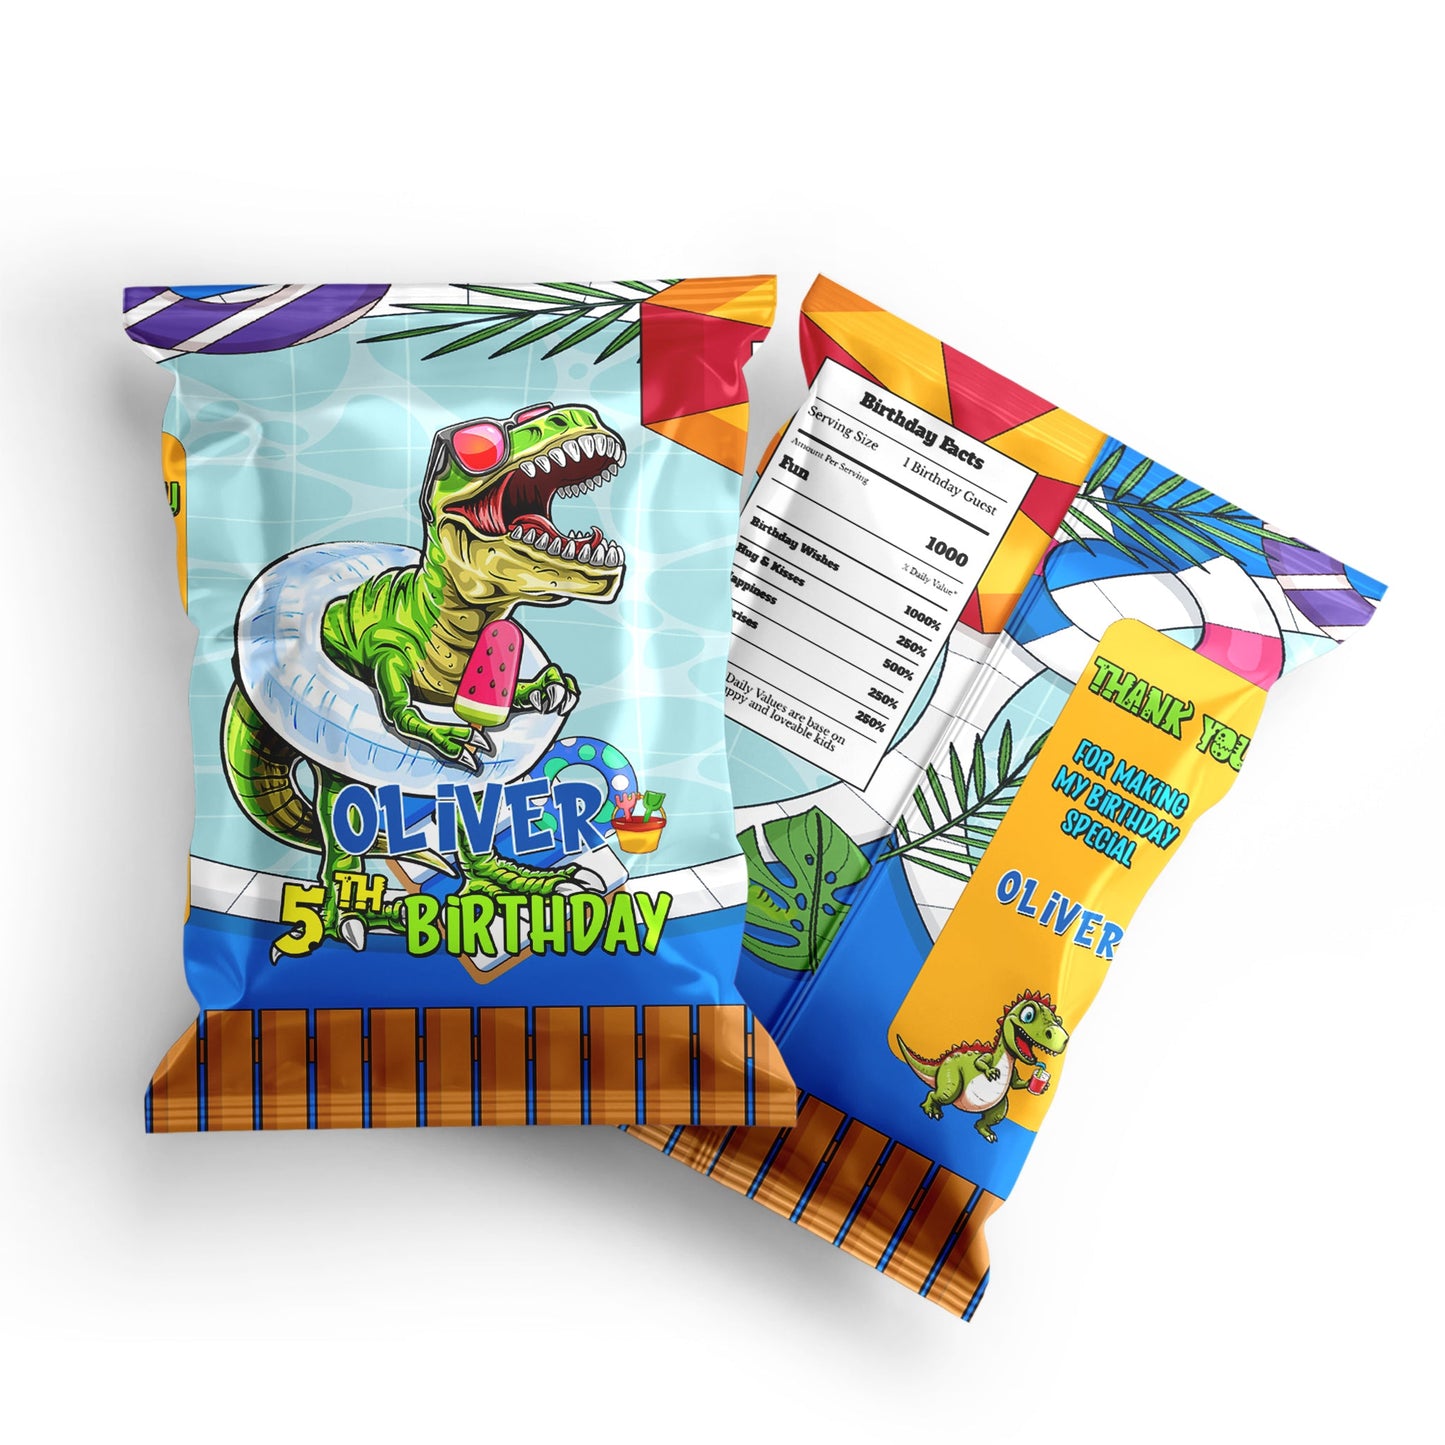 Personalized chips bag label with dinosaur illustration